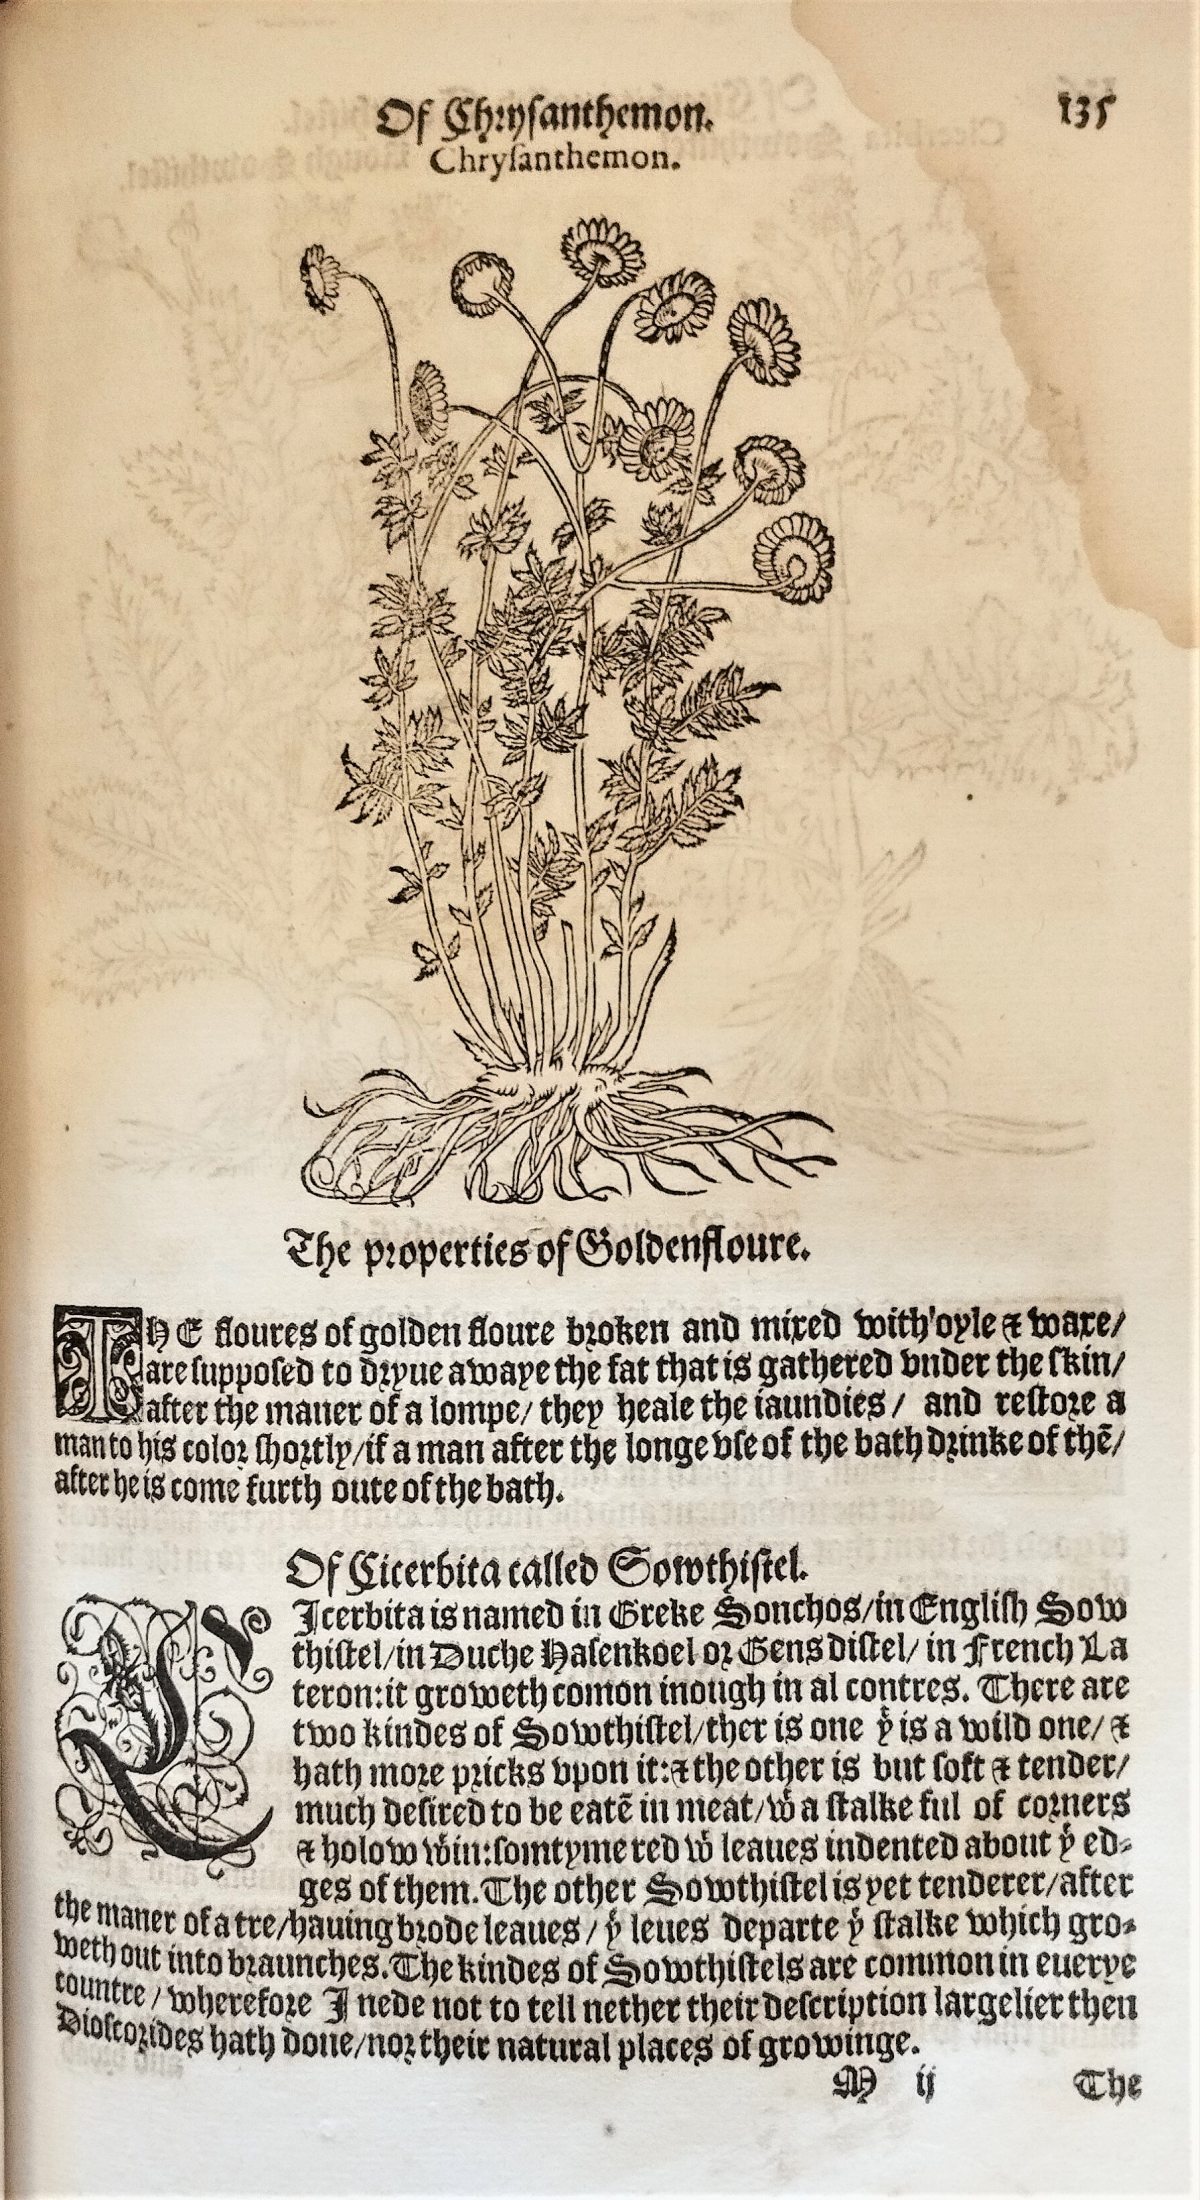 Page with the nomenclature, description and woodcuts illustration of the chrysanthemum plant and flowers.